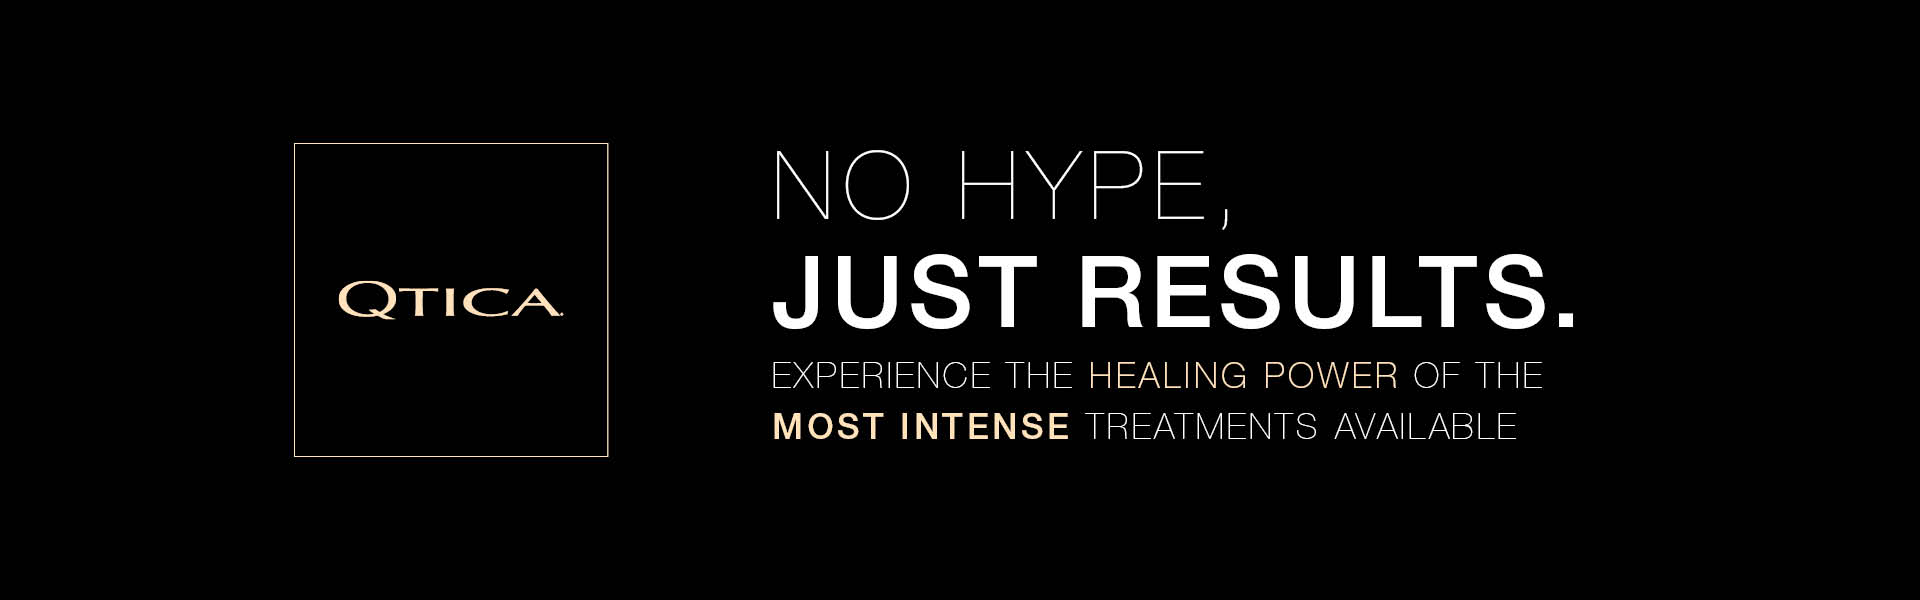 Qtica No Hype Just results. Experience the healing power of the most intense treatments available.